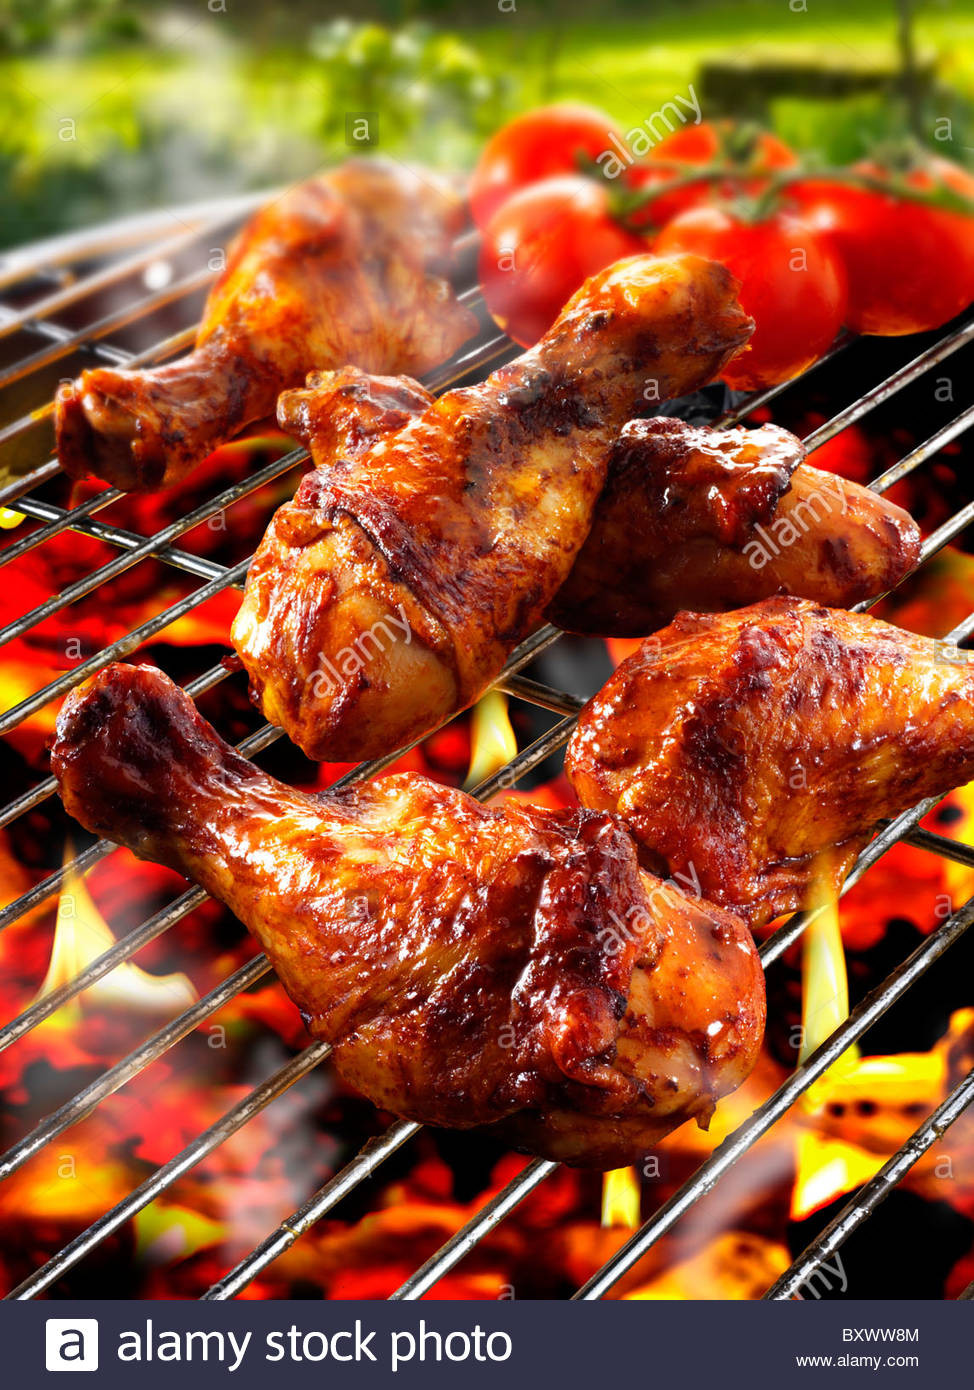 Bbq Chicken Legs On Grill
 Barbecue chicken legs & thighs on a BBQ grill Stock